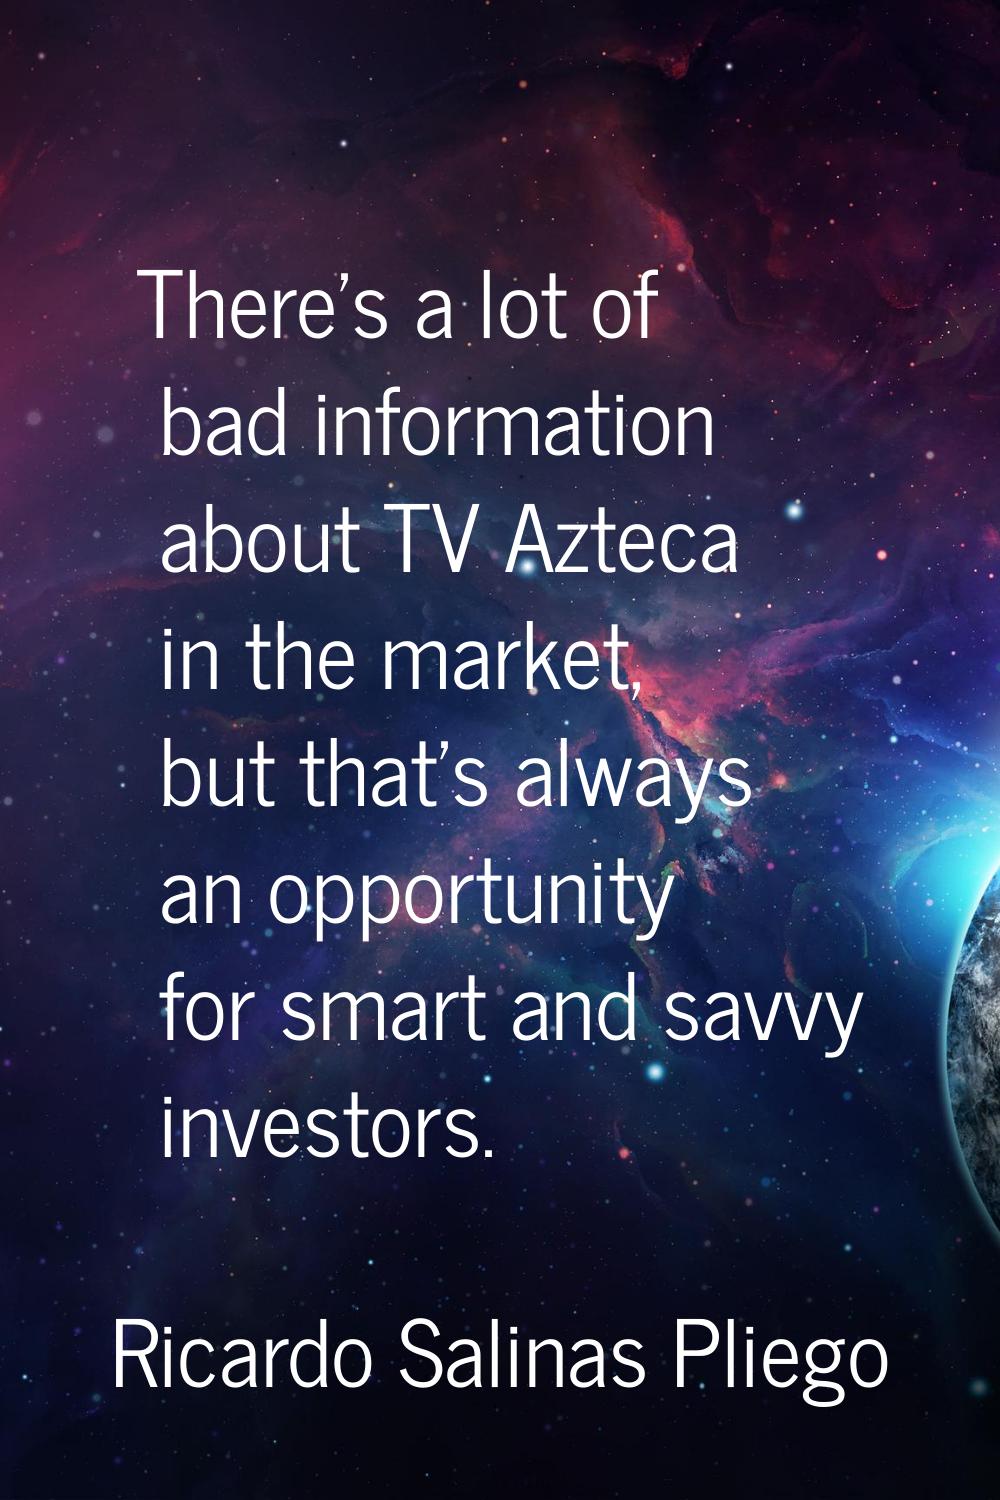 There's a lot of bad information about TV Azteca in the market, but that's always an opportunity fo